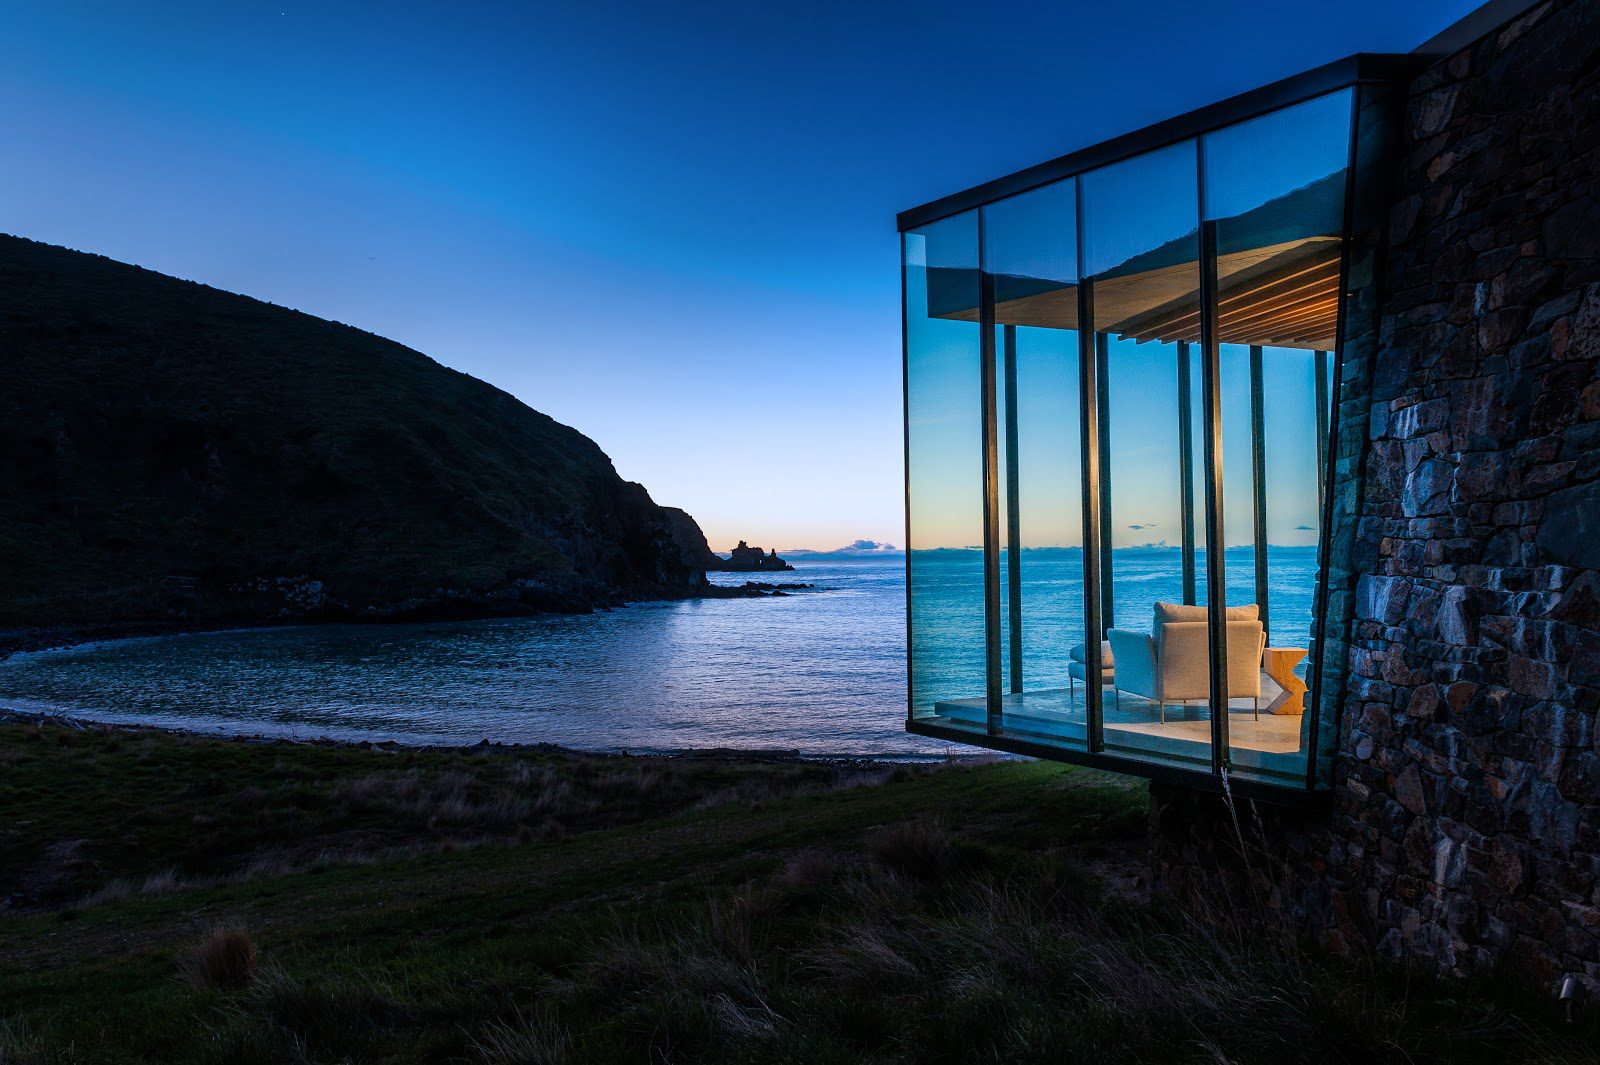 Don’t Miss These 8 Spectacular Luxury Hotels in New Zealand, Amazing Accommodation with Stunning Views